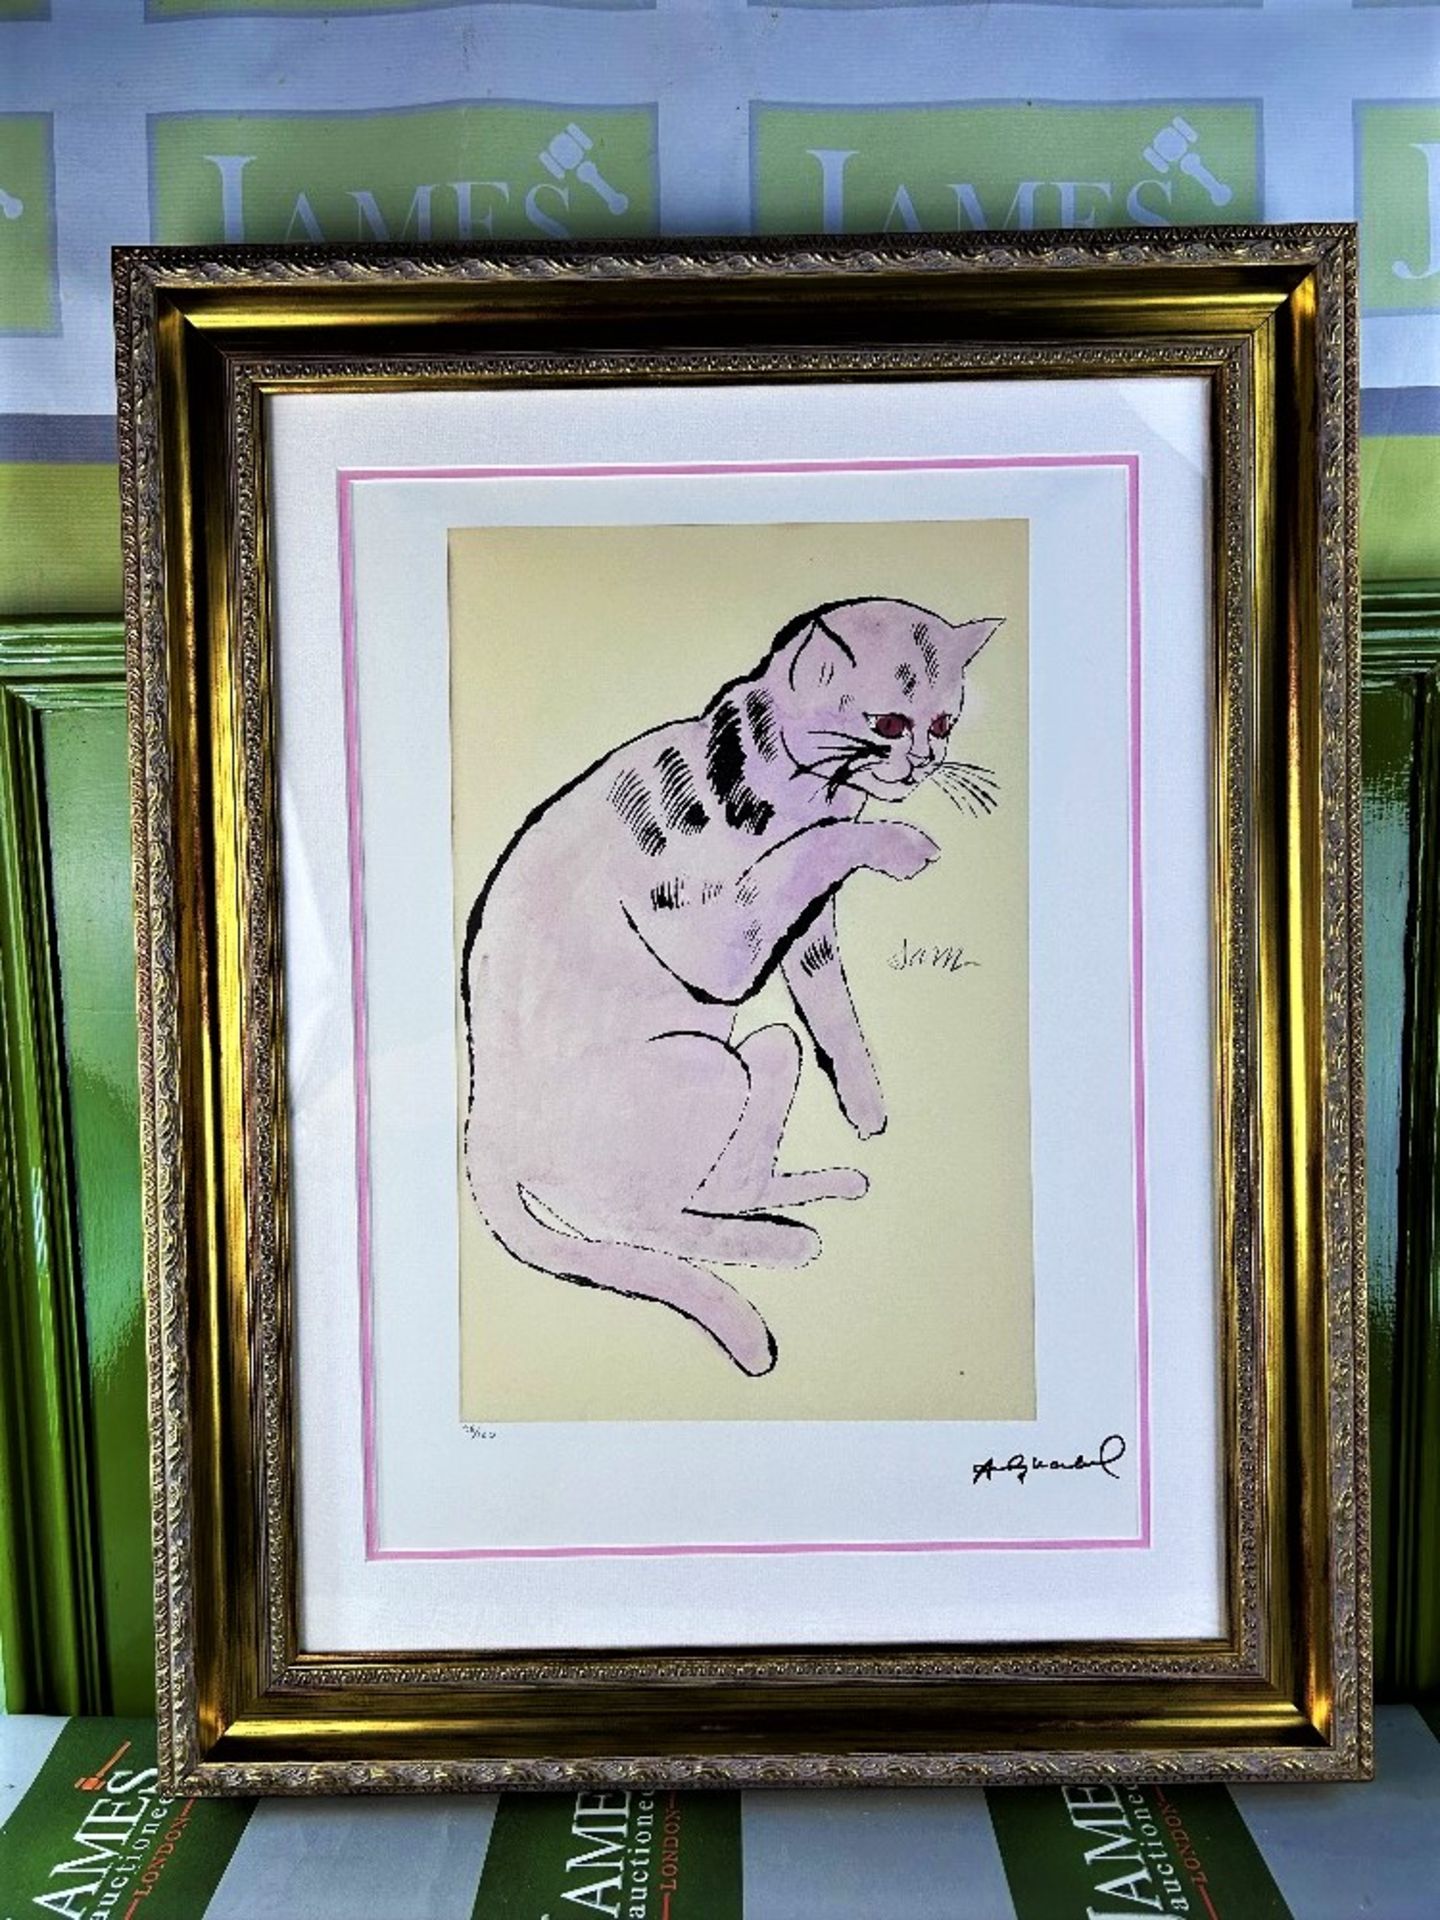 Andy Warhol-(1928-1987) "Pink Sam" Numbered Lithograph - Image 7 of 7